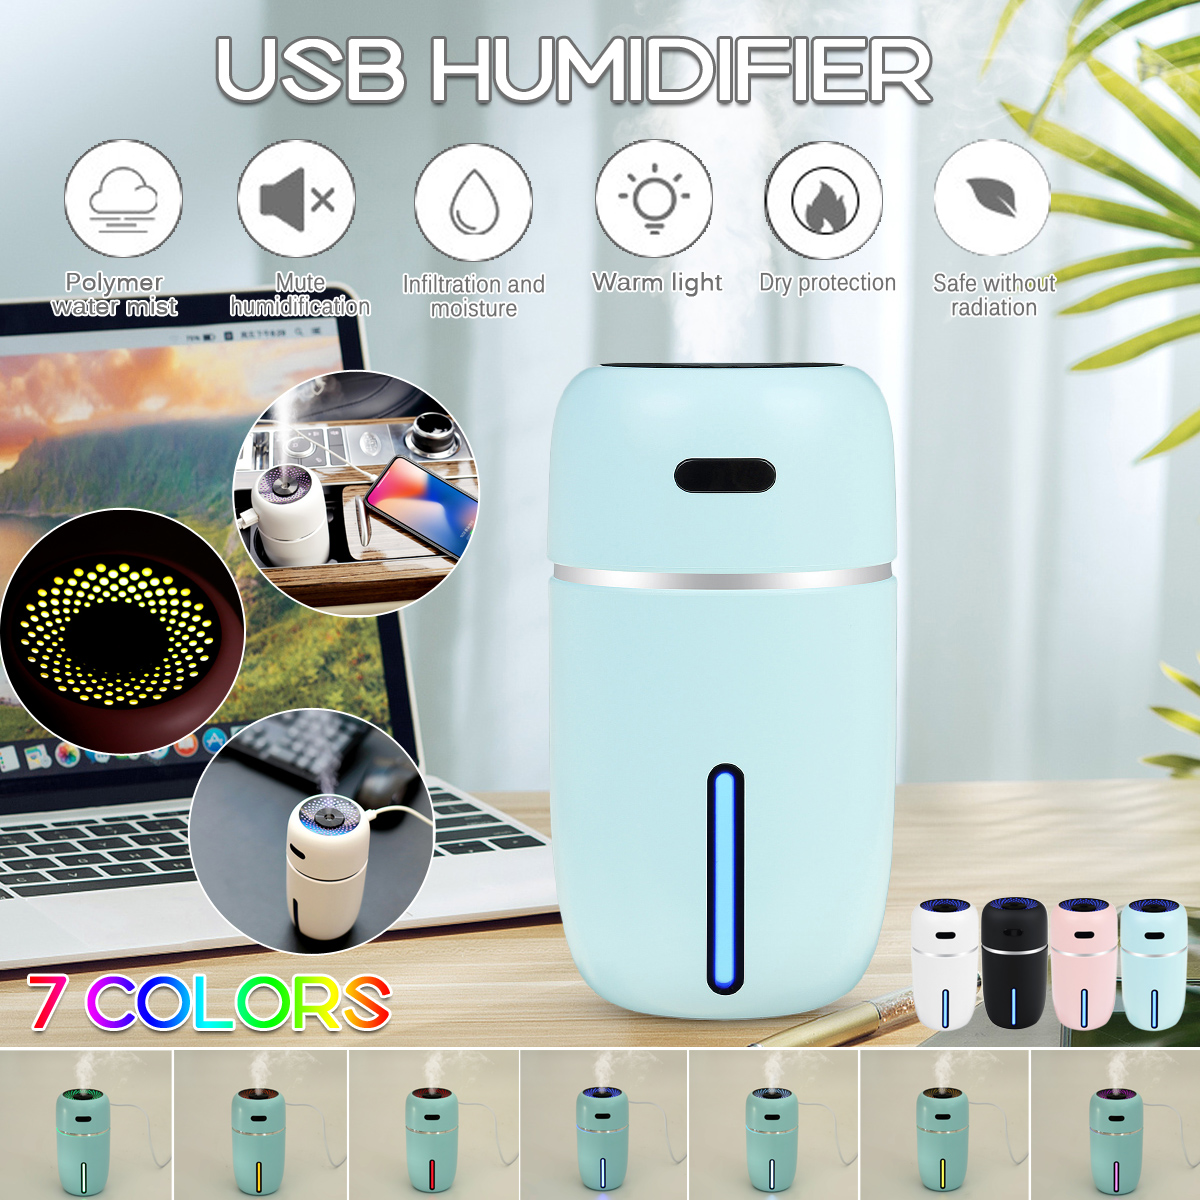 200ml-Electric-Air-Humidifier-Diffuser-Aroma-Mist-Purifier-LED-Light-USB-Charging-Power-Bank-for-Por-1809965-1